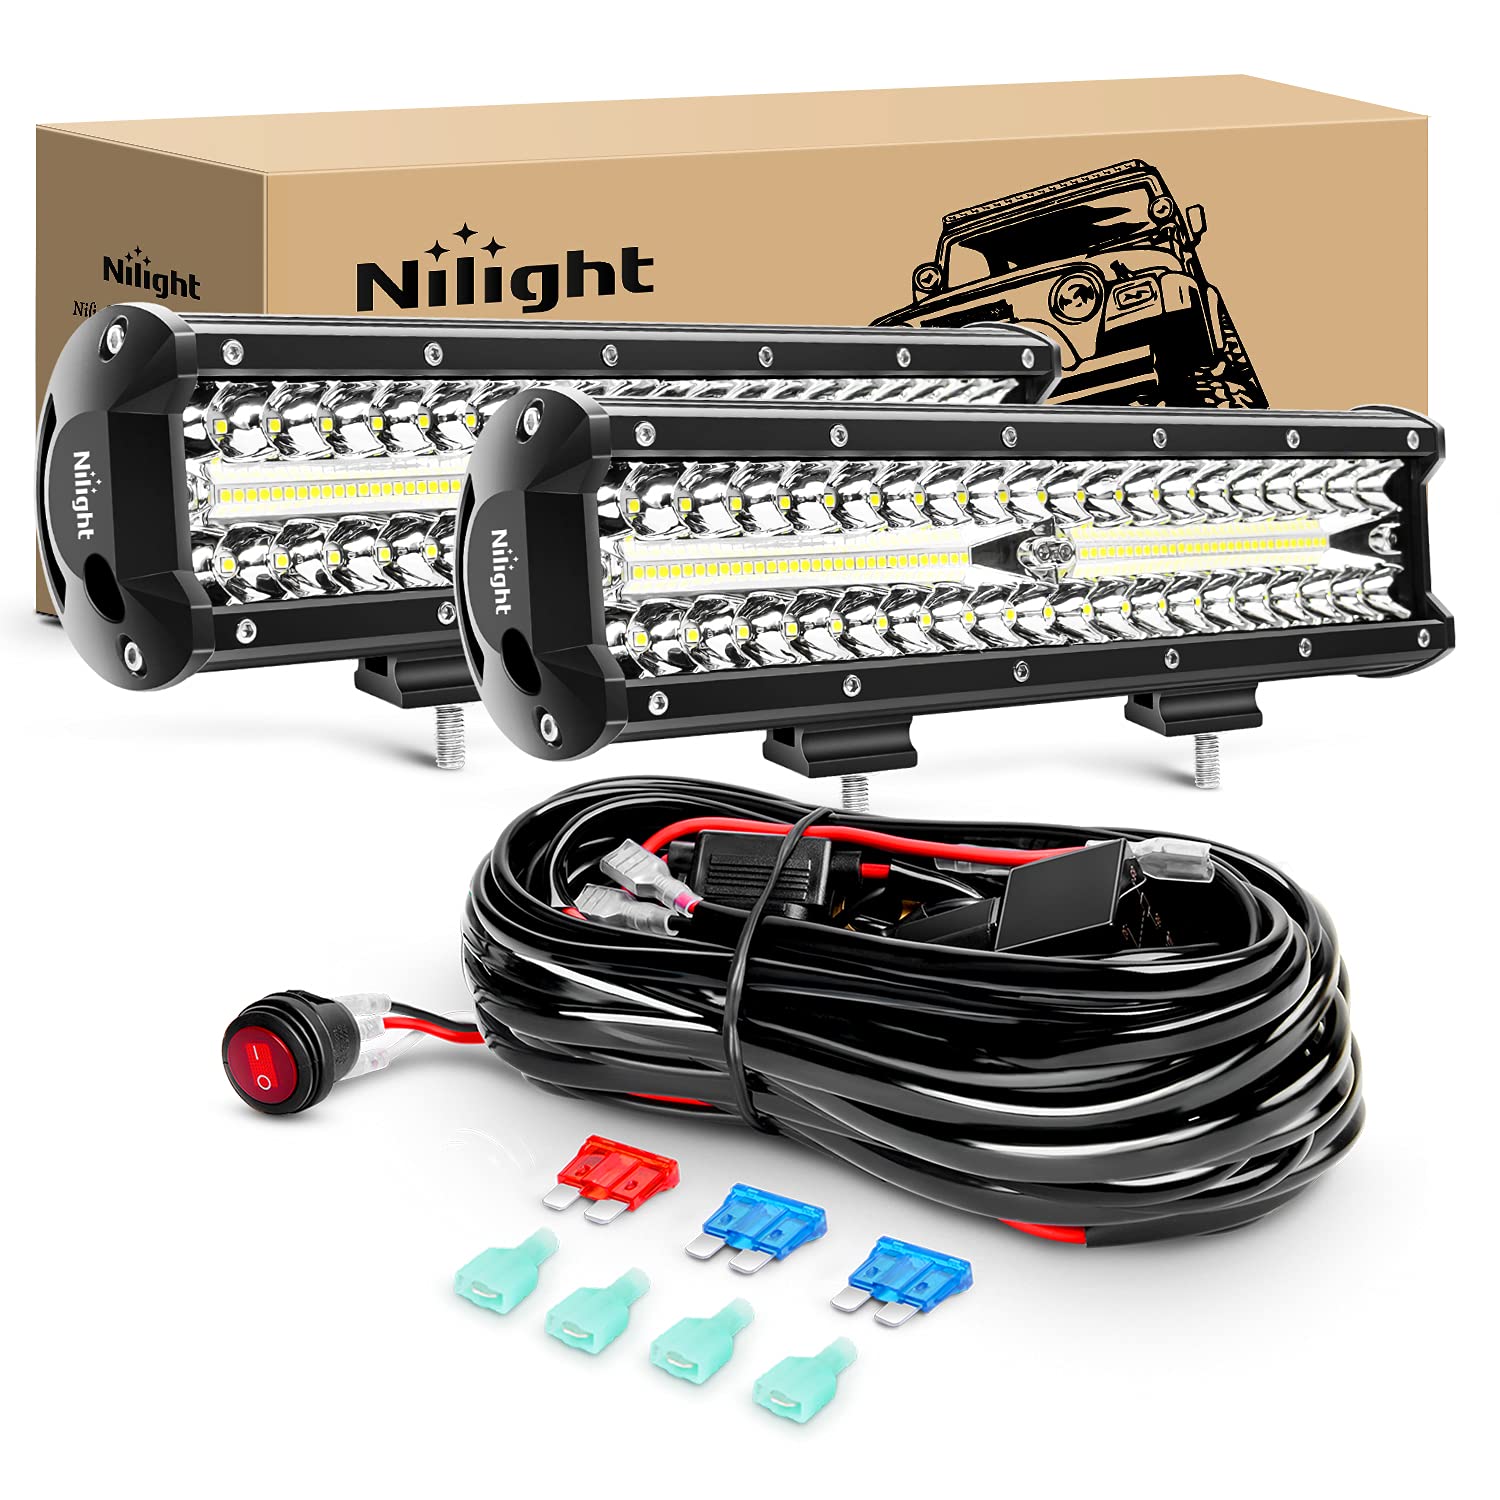 Nilight LED Light Bar 2Pcs 12 Inch 300W Triple Row Flood Spot Combo 30000LM Driving Led Off Road Lights with Off Road Wiring